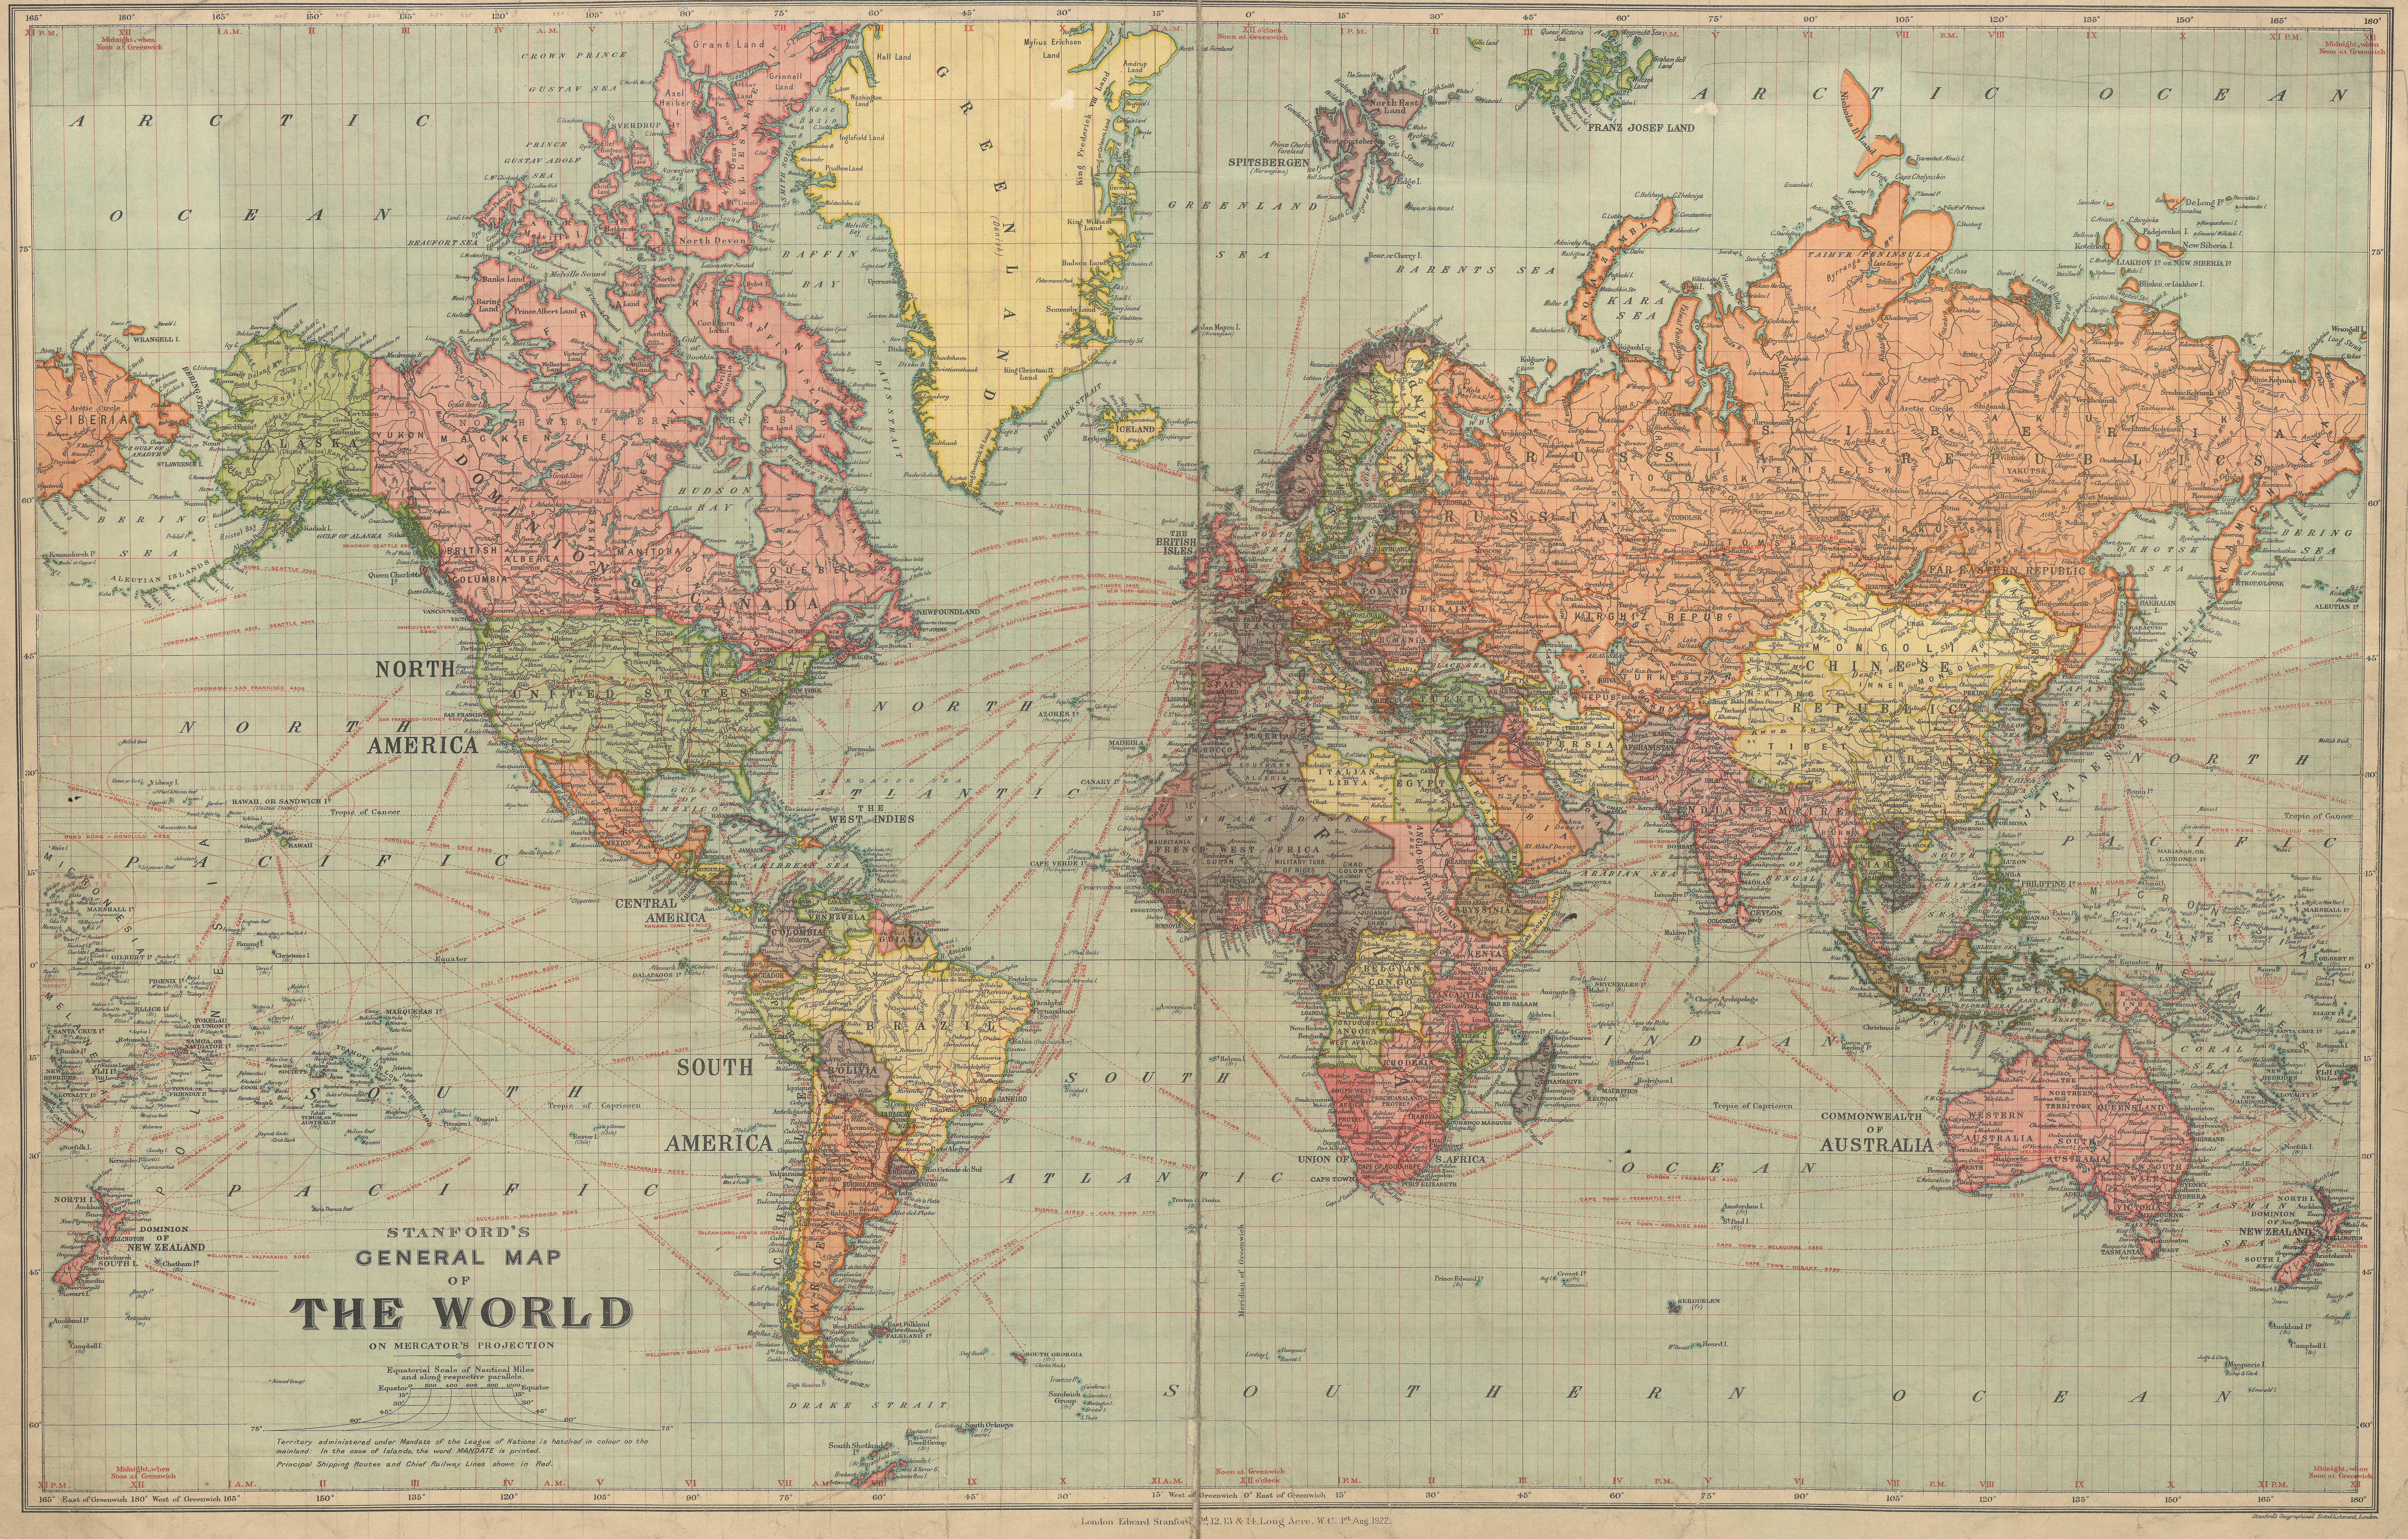 Stanford`s General map of The World, 1922.jpg